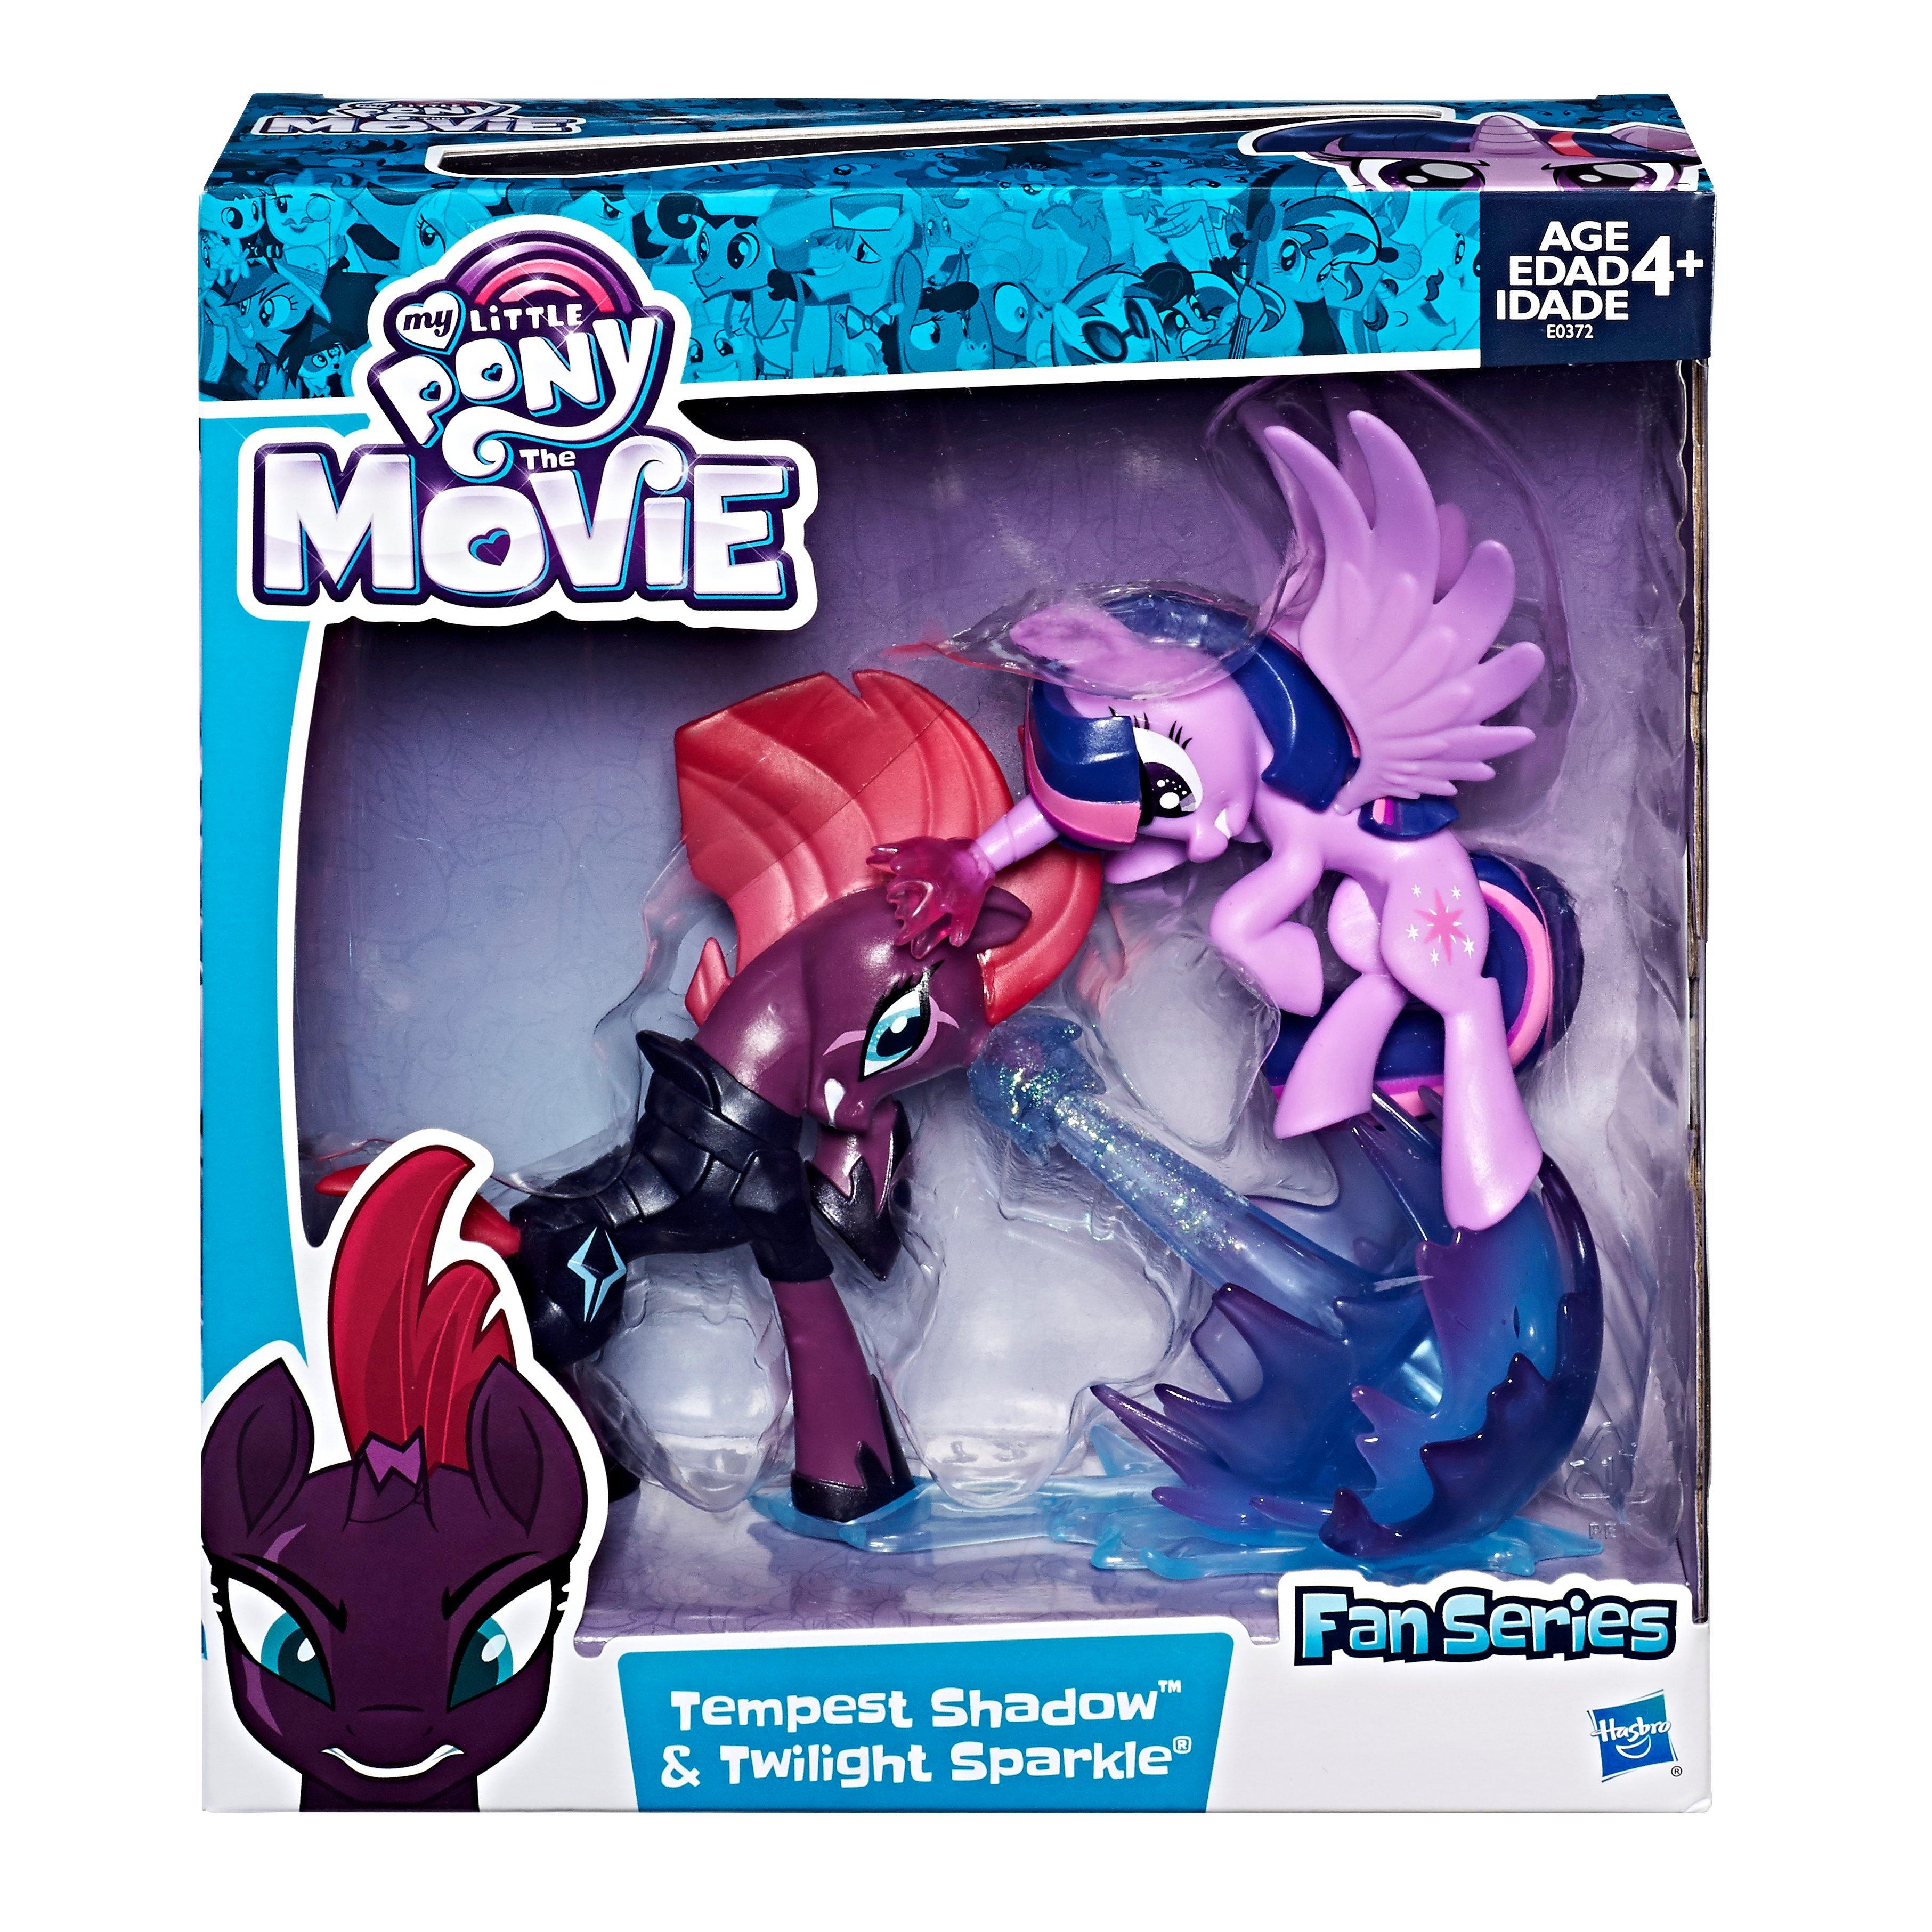 My Little Pony The Movie Fan Series Tempest Shadow And Twilight Sparkle Action Figure 2 Pack Gamestop My little pony the movie fan series tempest shadow & twilight sparkle figure. my little pony the movie fan series tempest shadow and twilight sparkle action figure 2 pack gamestop